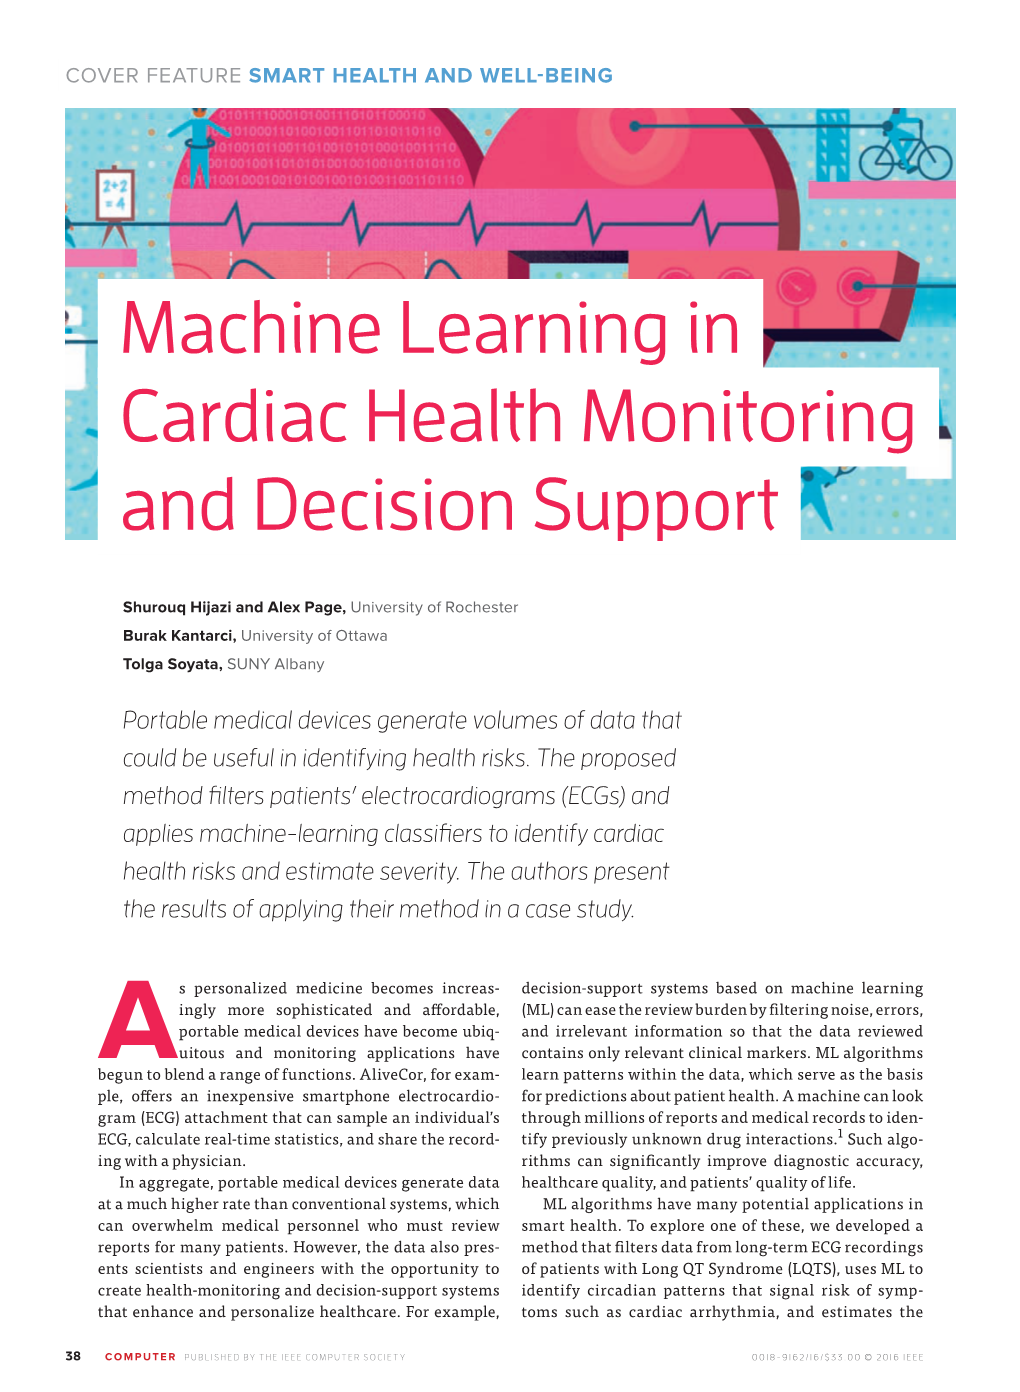 Machine Learning in Cardiac Health Monitoring and Decision Support